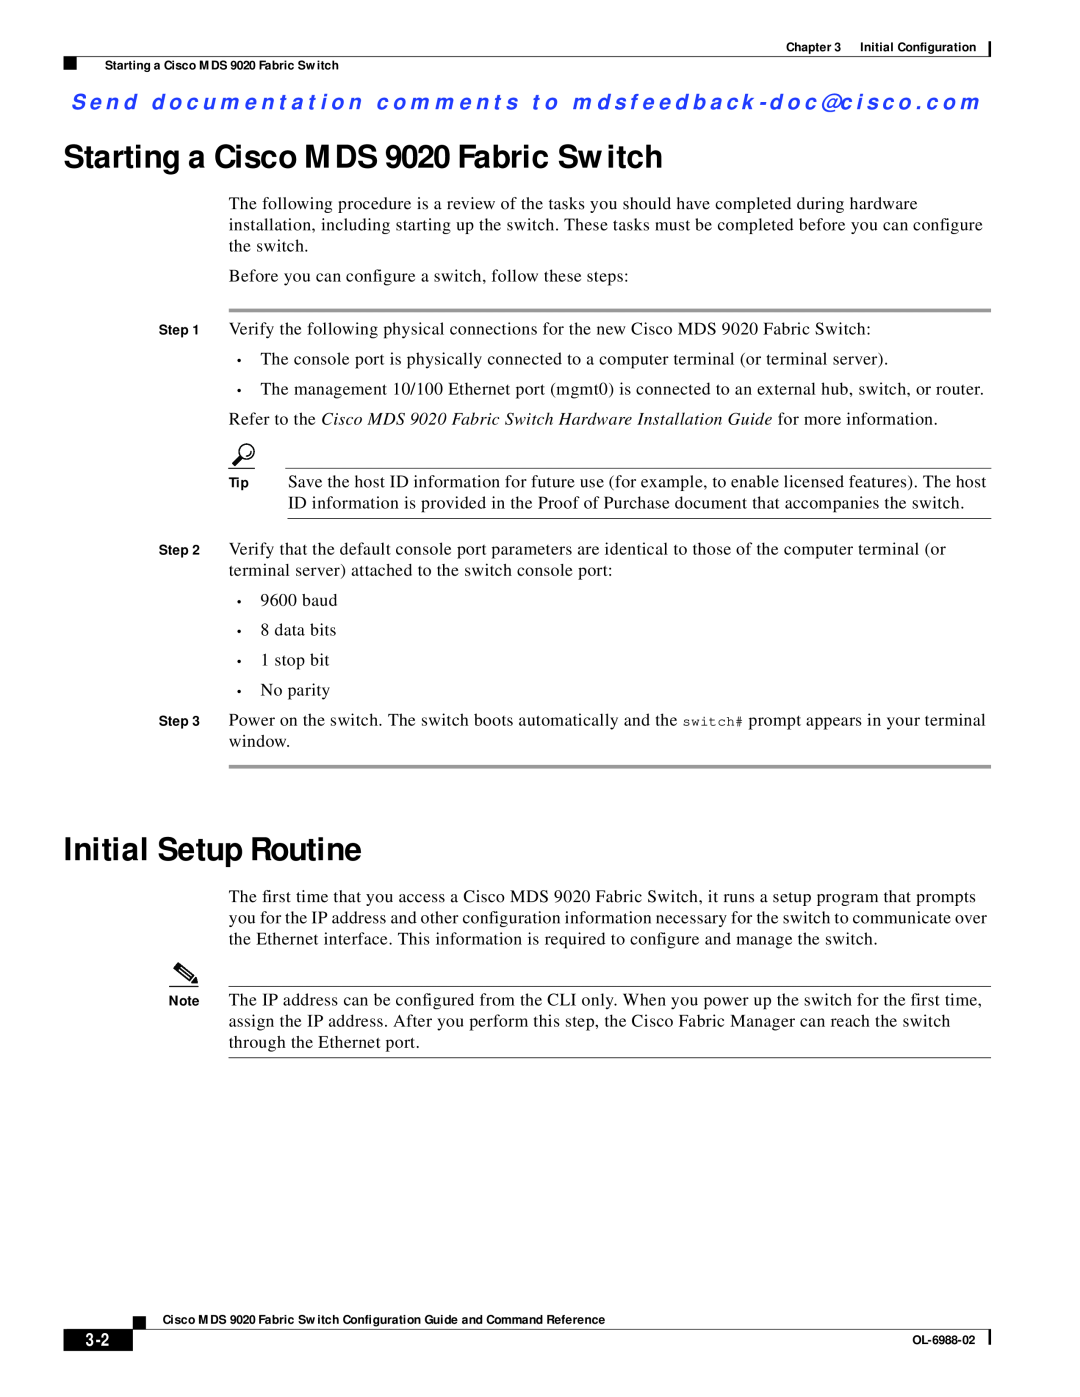 Cisco Systems manual Starting a Cisco MDS 9020 Fabric Switch, Initial Setup Routine 